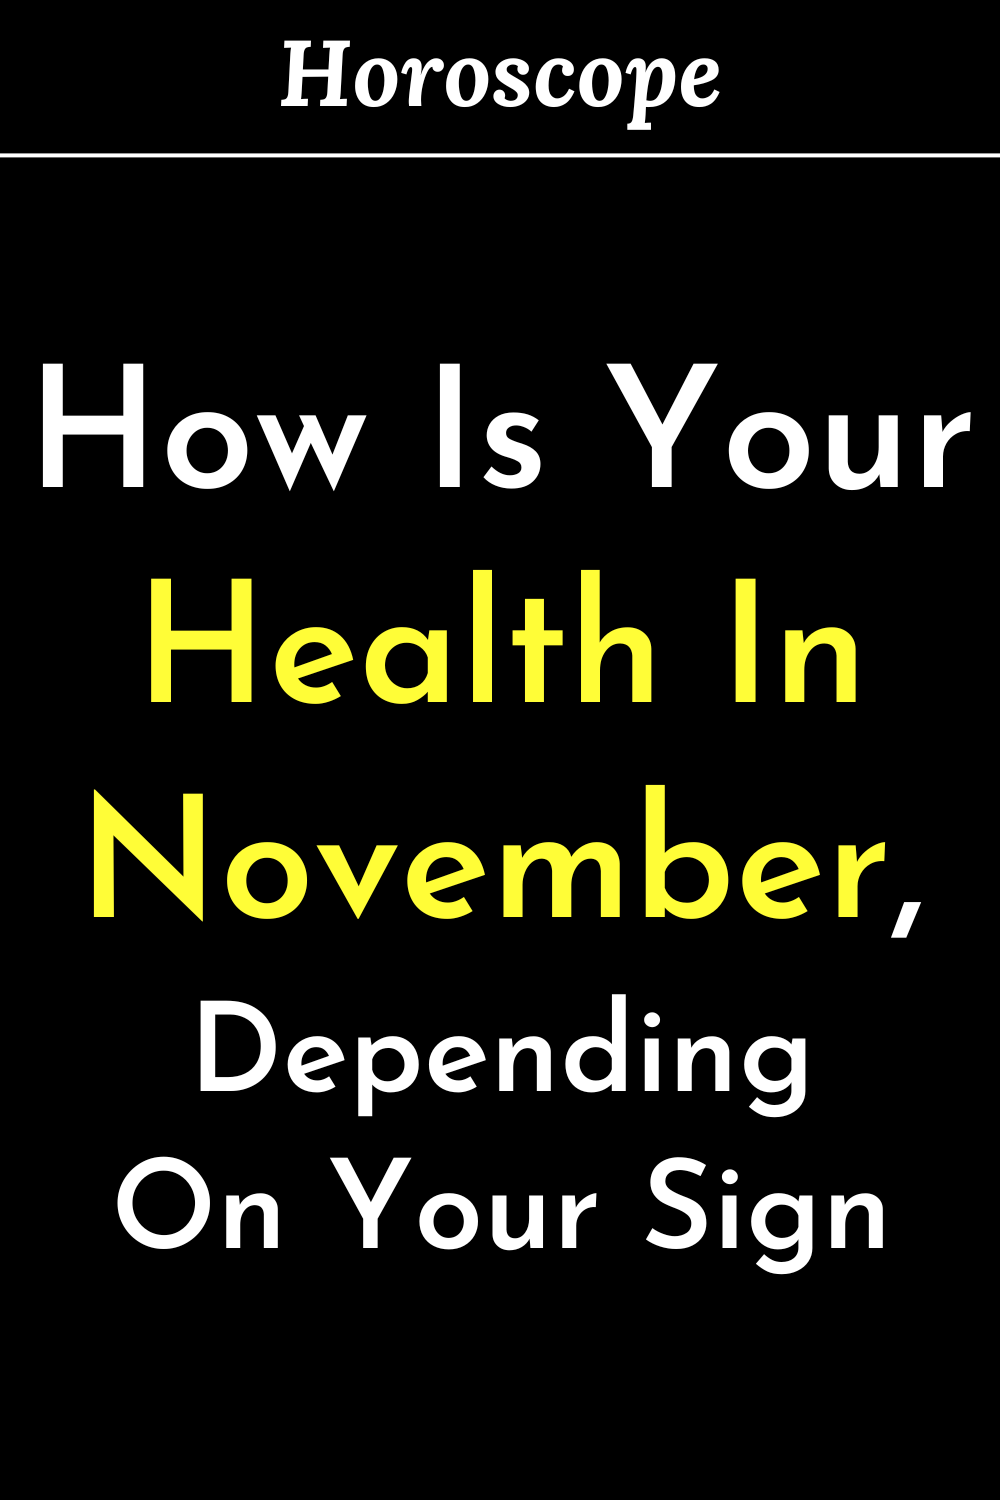 How Is Your Health In November, Depending On Your Sign